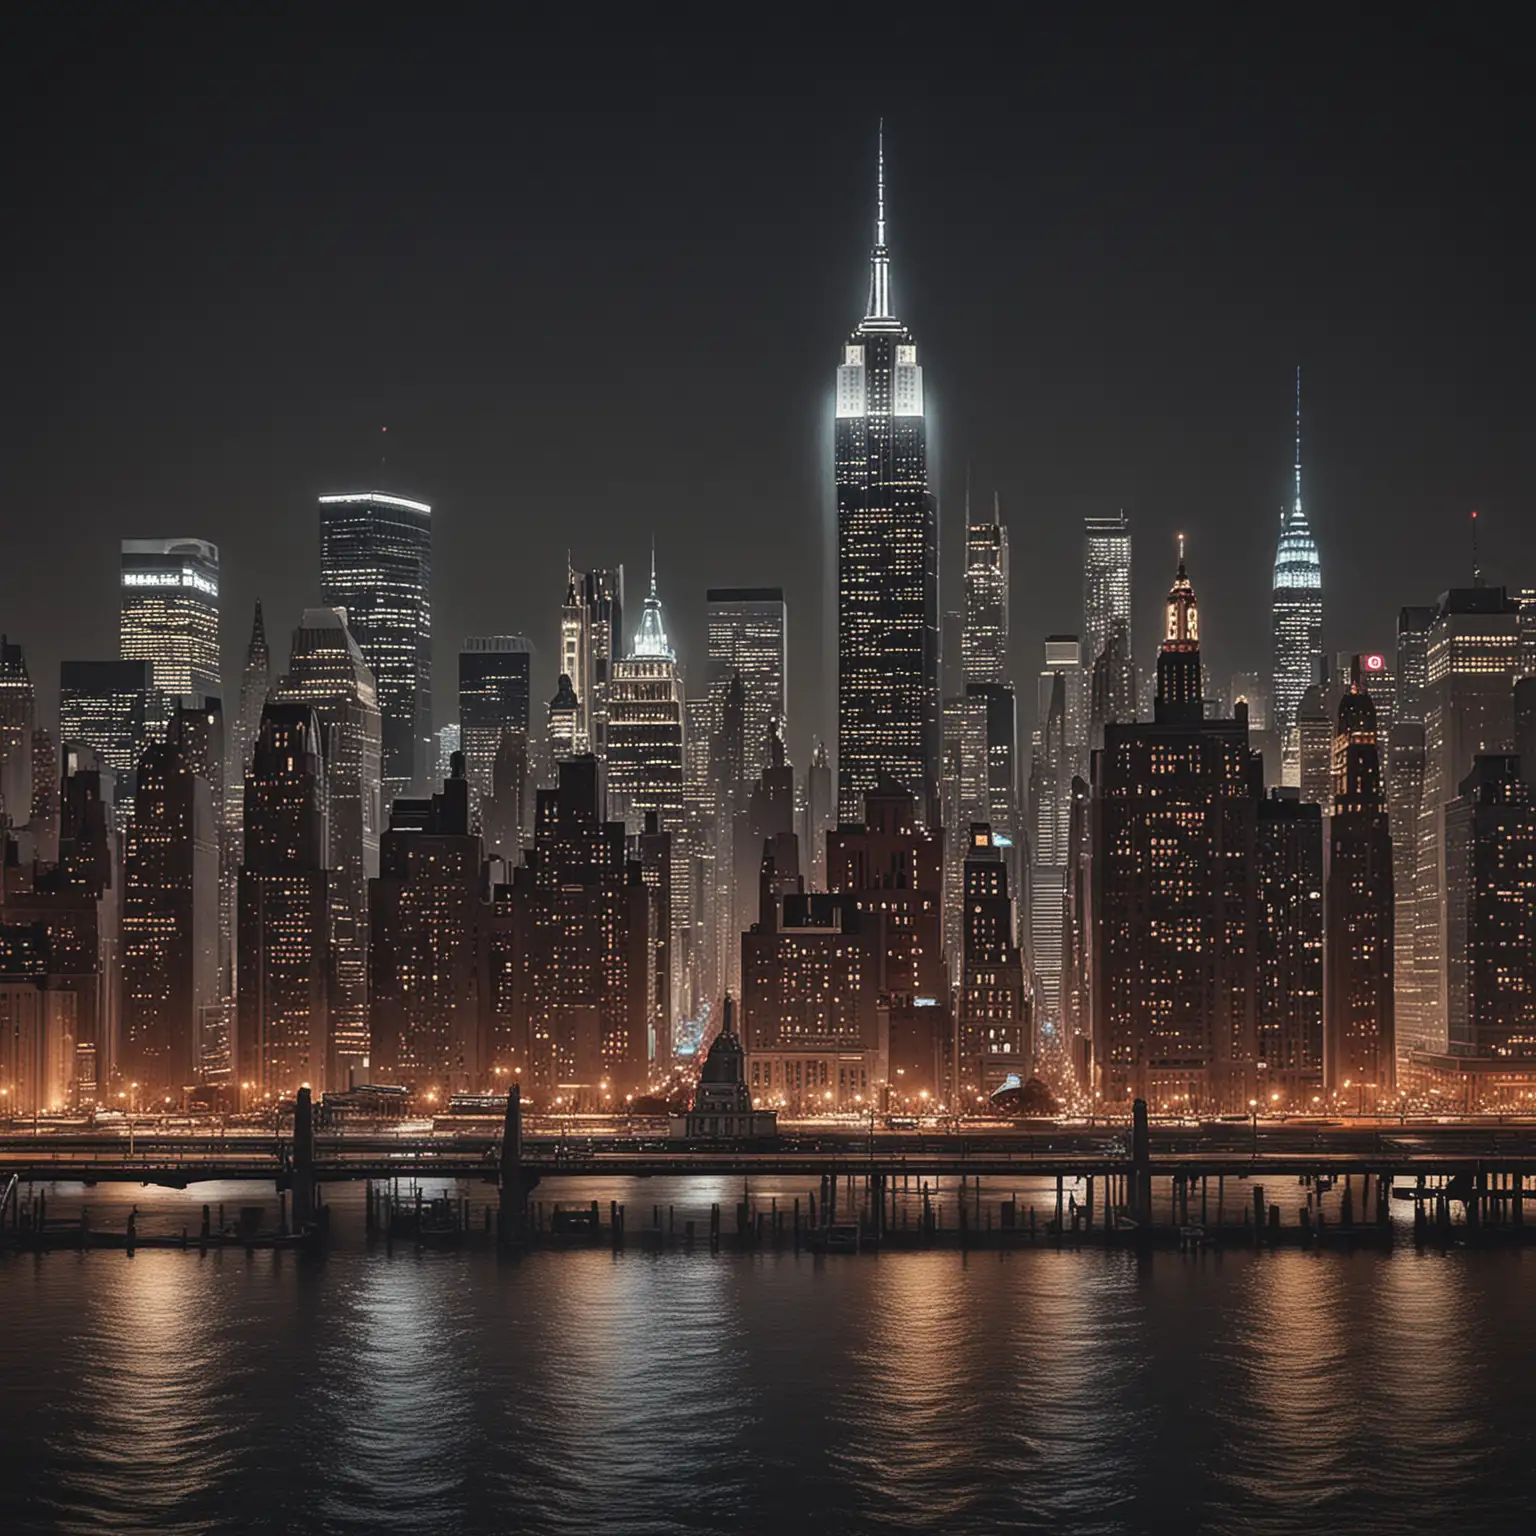 Nighttime Skyline of New York City with Iconic Skyscrapers and Landmarks